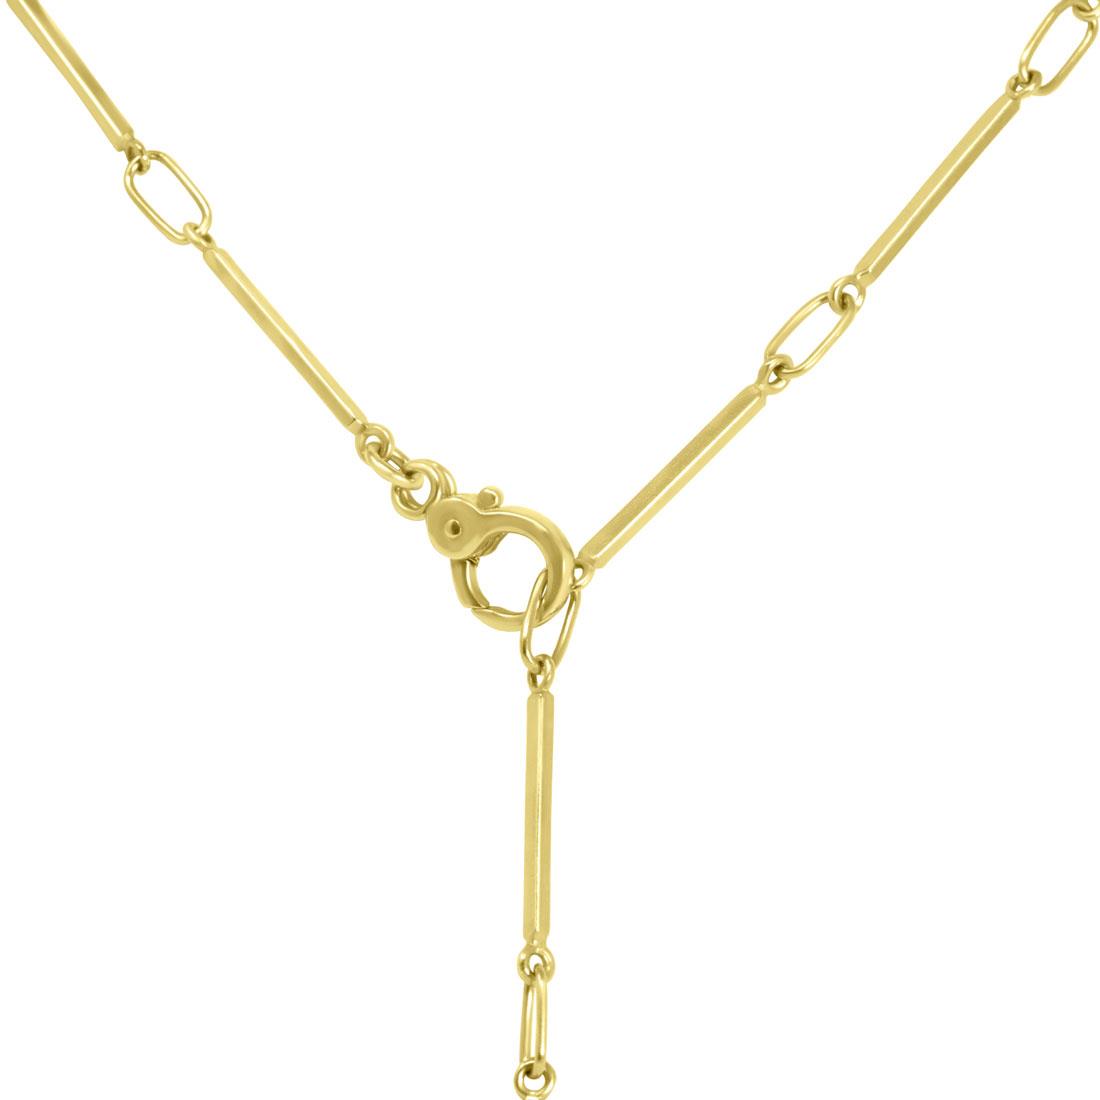  Yellow gold necklace, lenght 78cm - POMELLATO